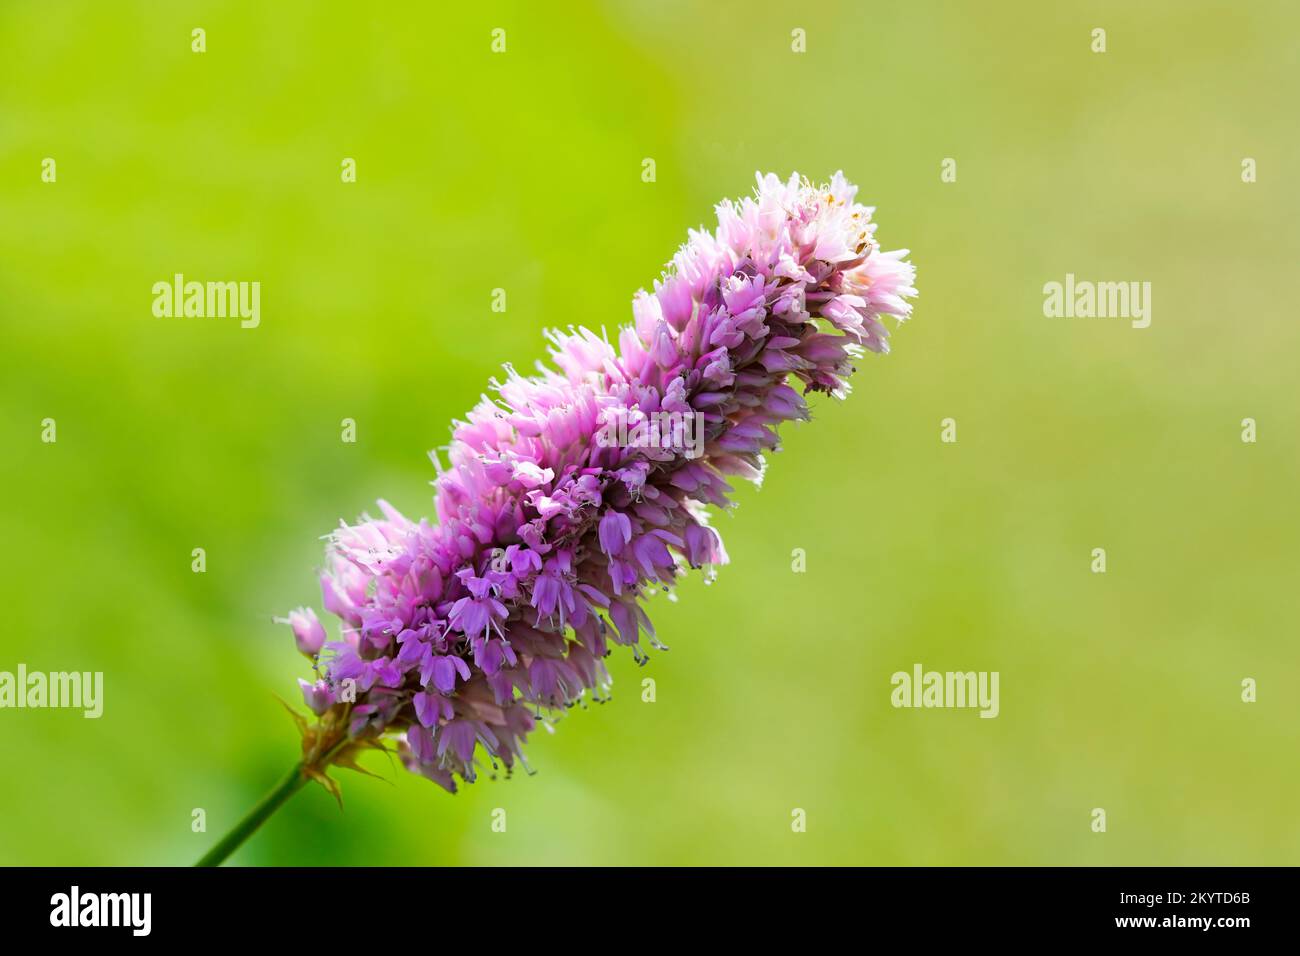 Purple knotweed flower against a green background. Close-up of the plant. Persicaria. Stock Photo